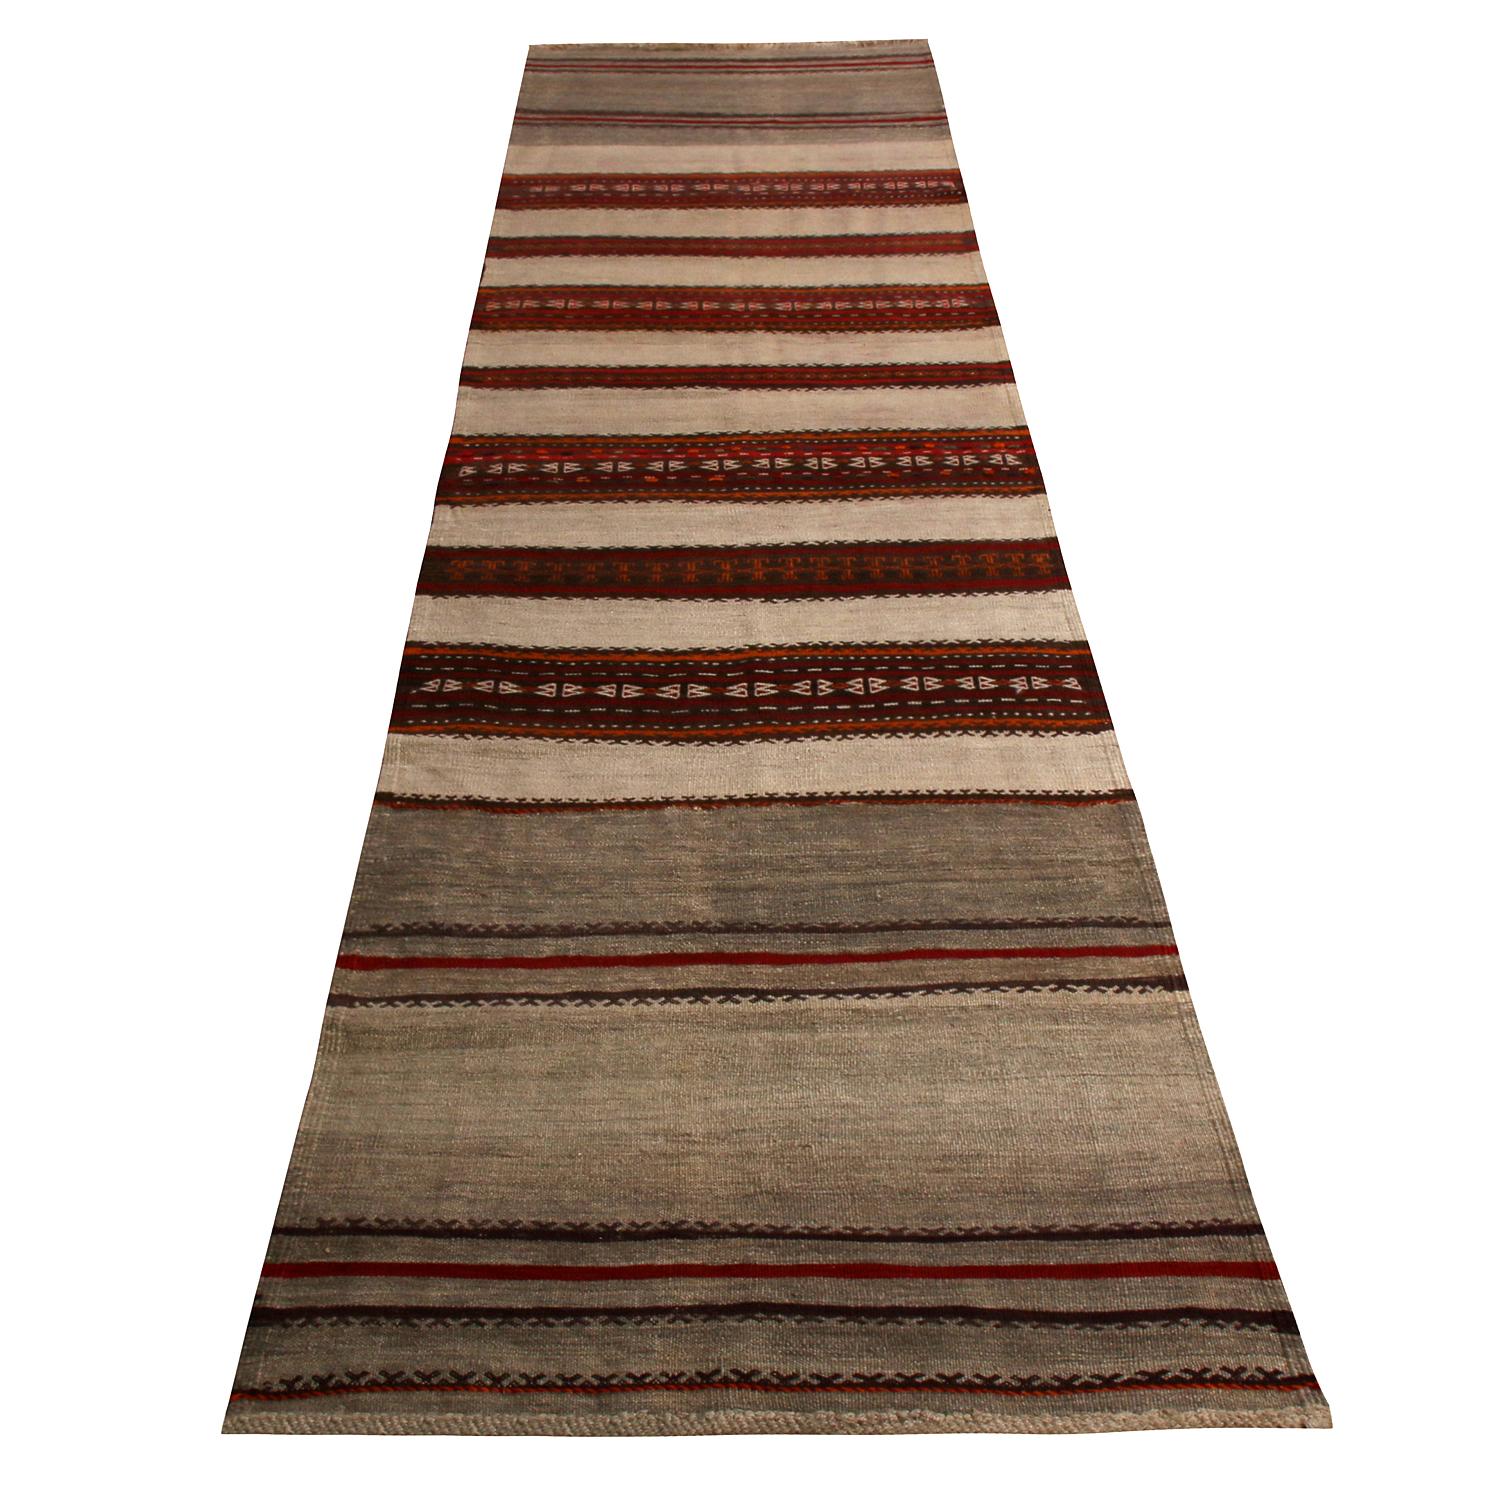 Handwoven in wool originating from Persia between 1950-1960, this vintage midcentury Persian Kilim runner is identified as a Kalat (Qalat) rug, named for the titular region and the nomadic tribal weavers of this family of Turkeman (Turkoman) rug